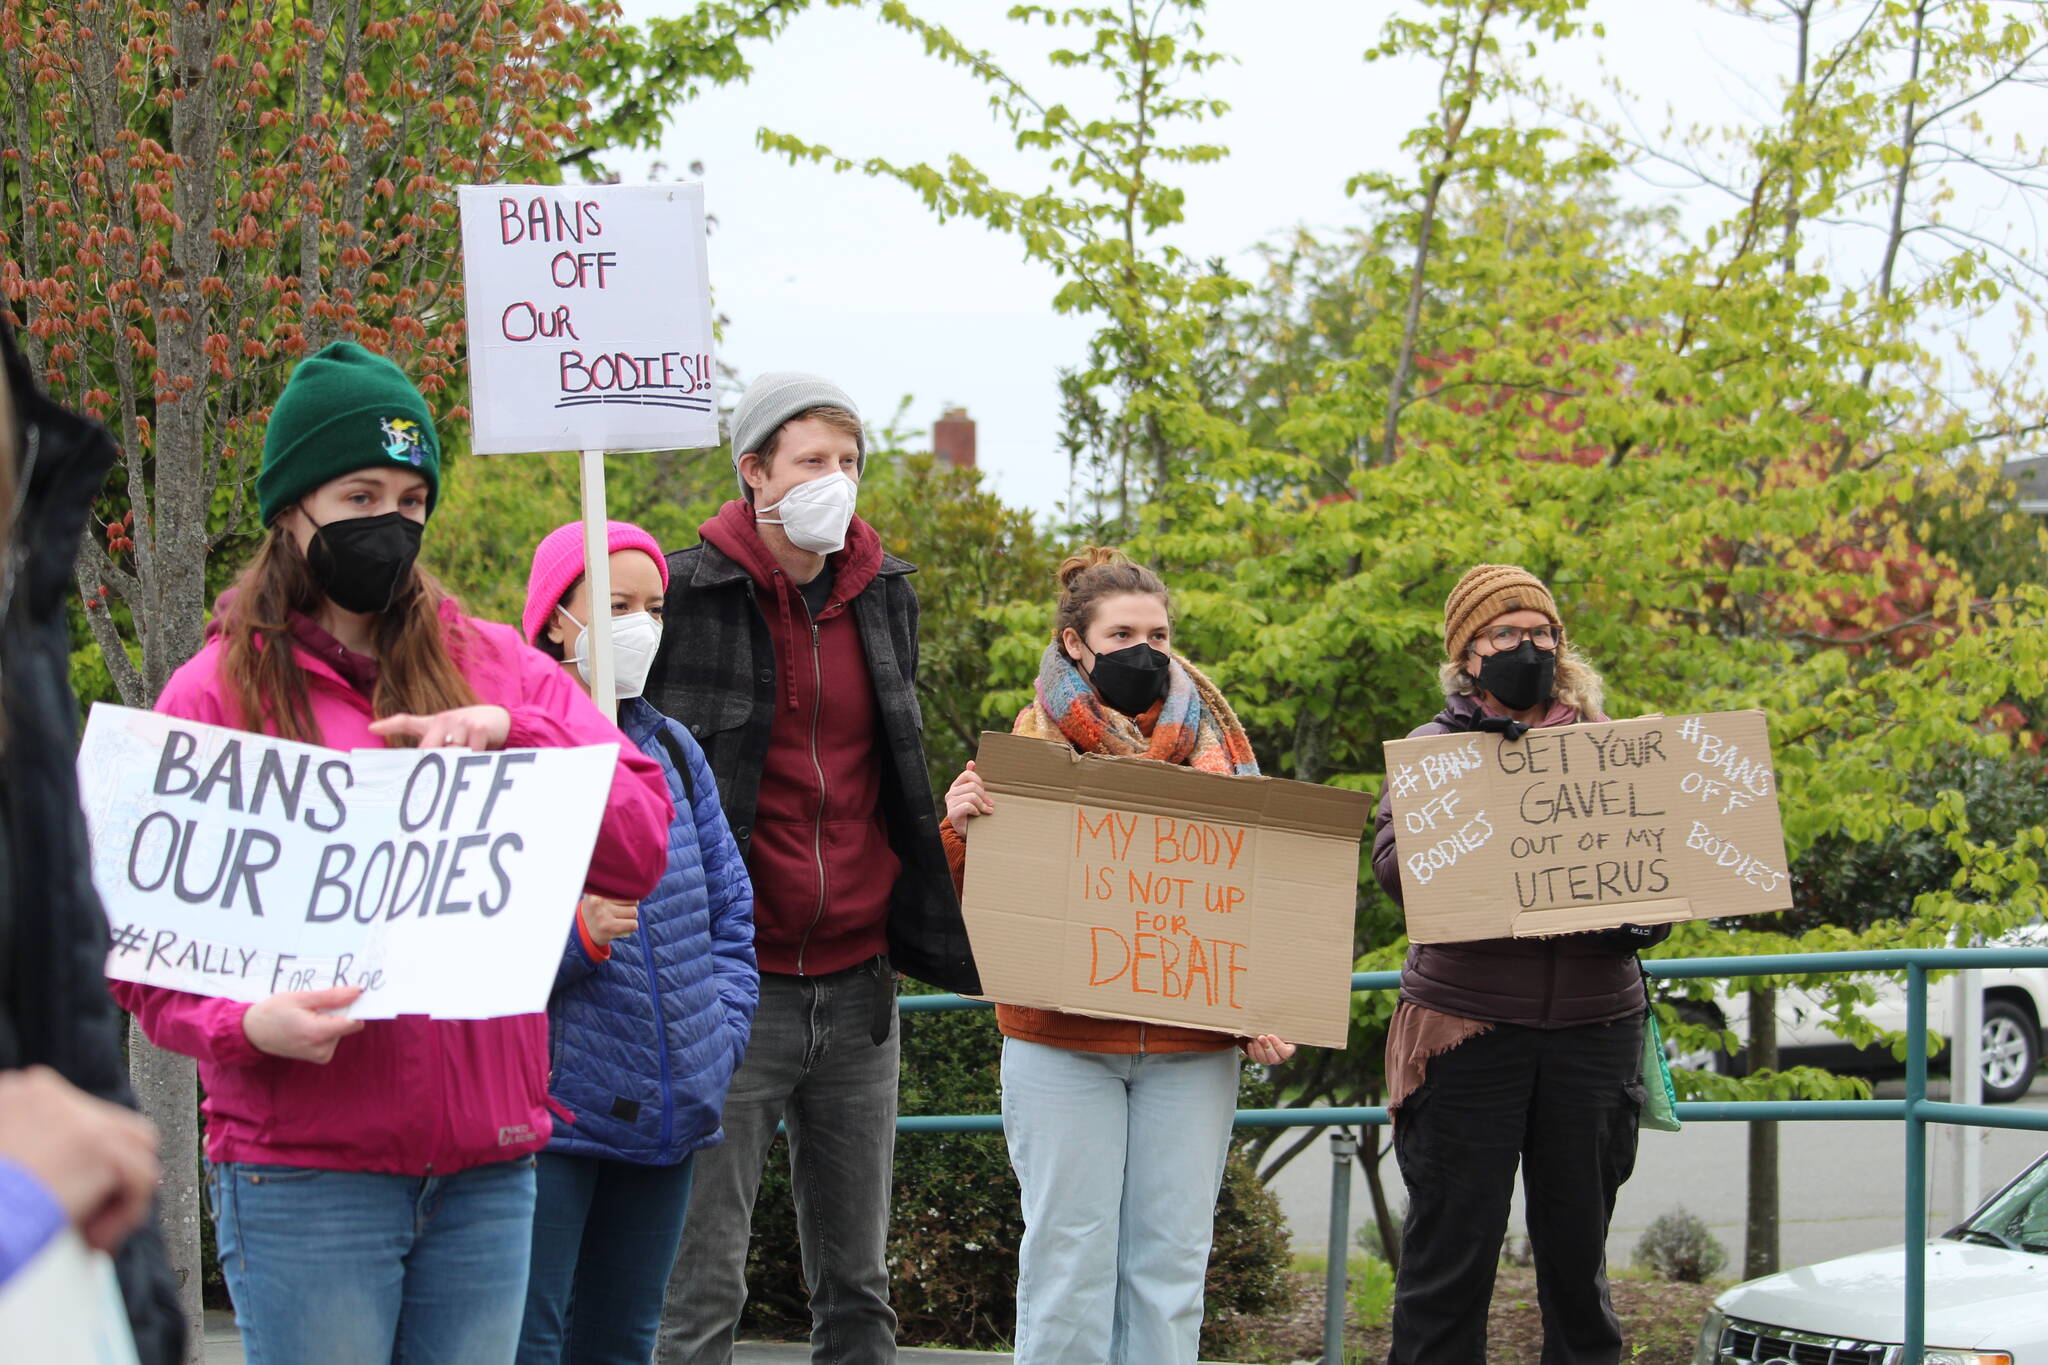 Whidbey residents took to the street Tuesday in Coupeville to rally for abortion rights following the leak of a Supreme Court draft opinion that indicated the court intends to overturn Roe v. Wade. (Photo by Karina Andrew/Whidbey News-Times)